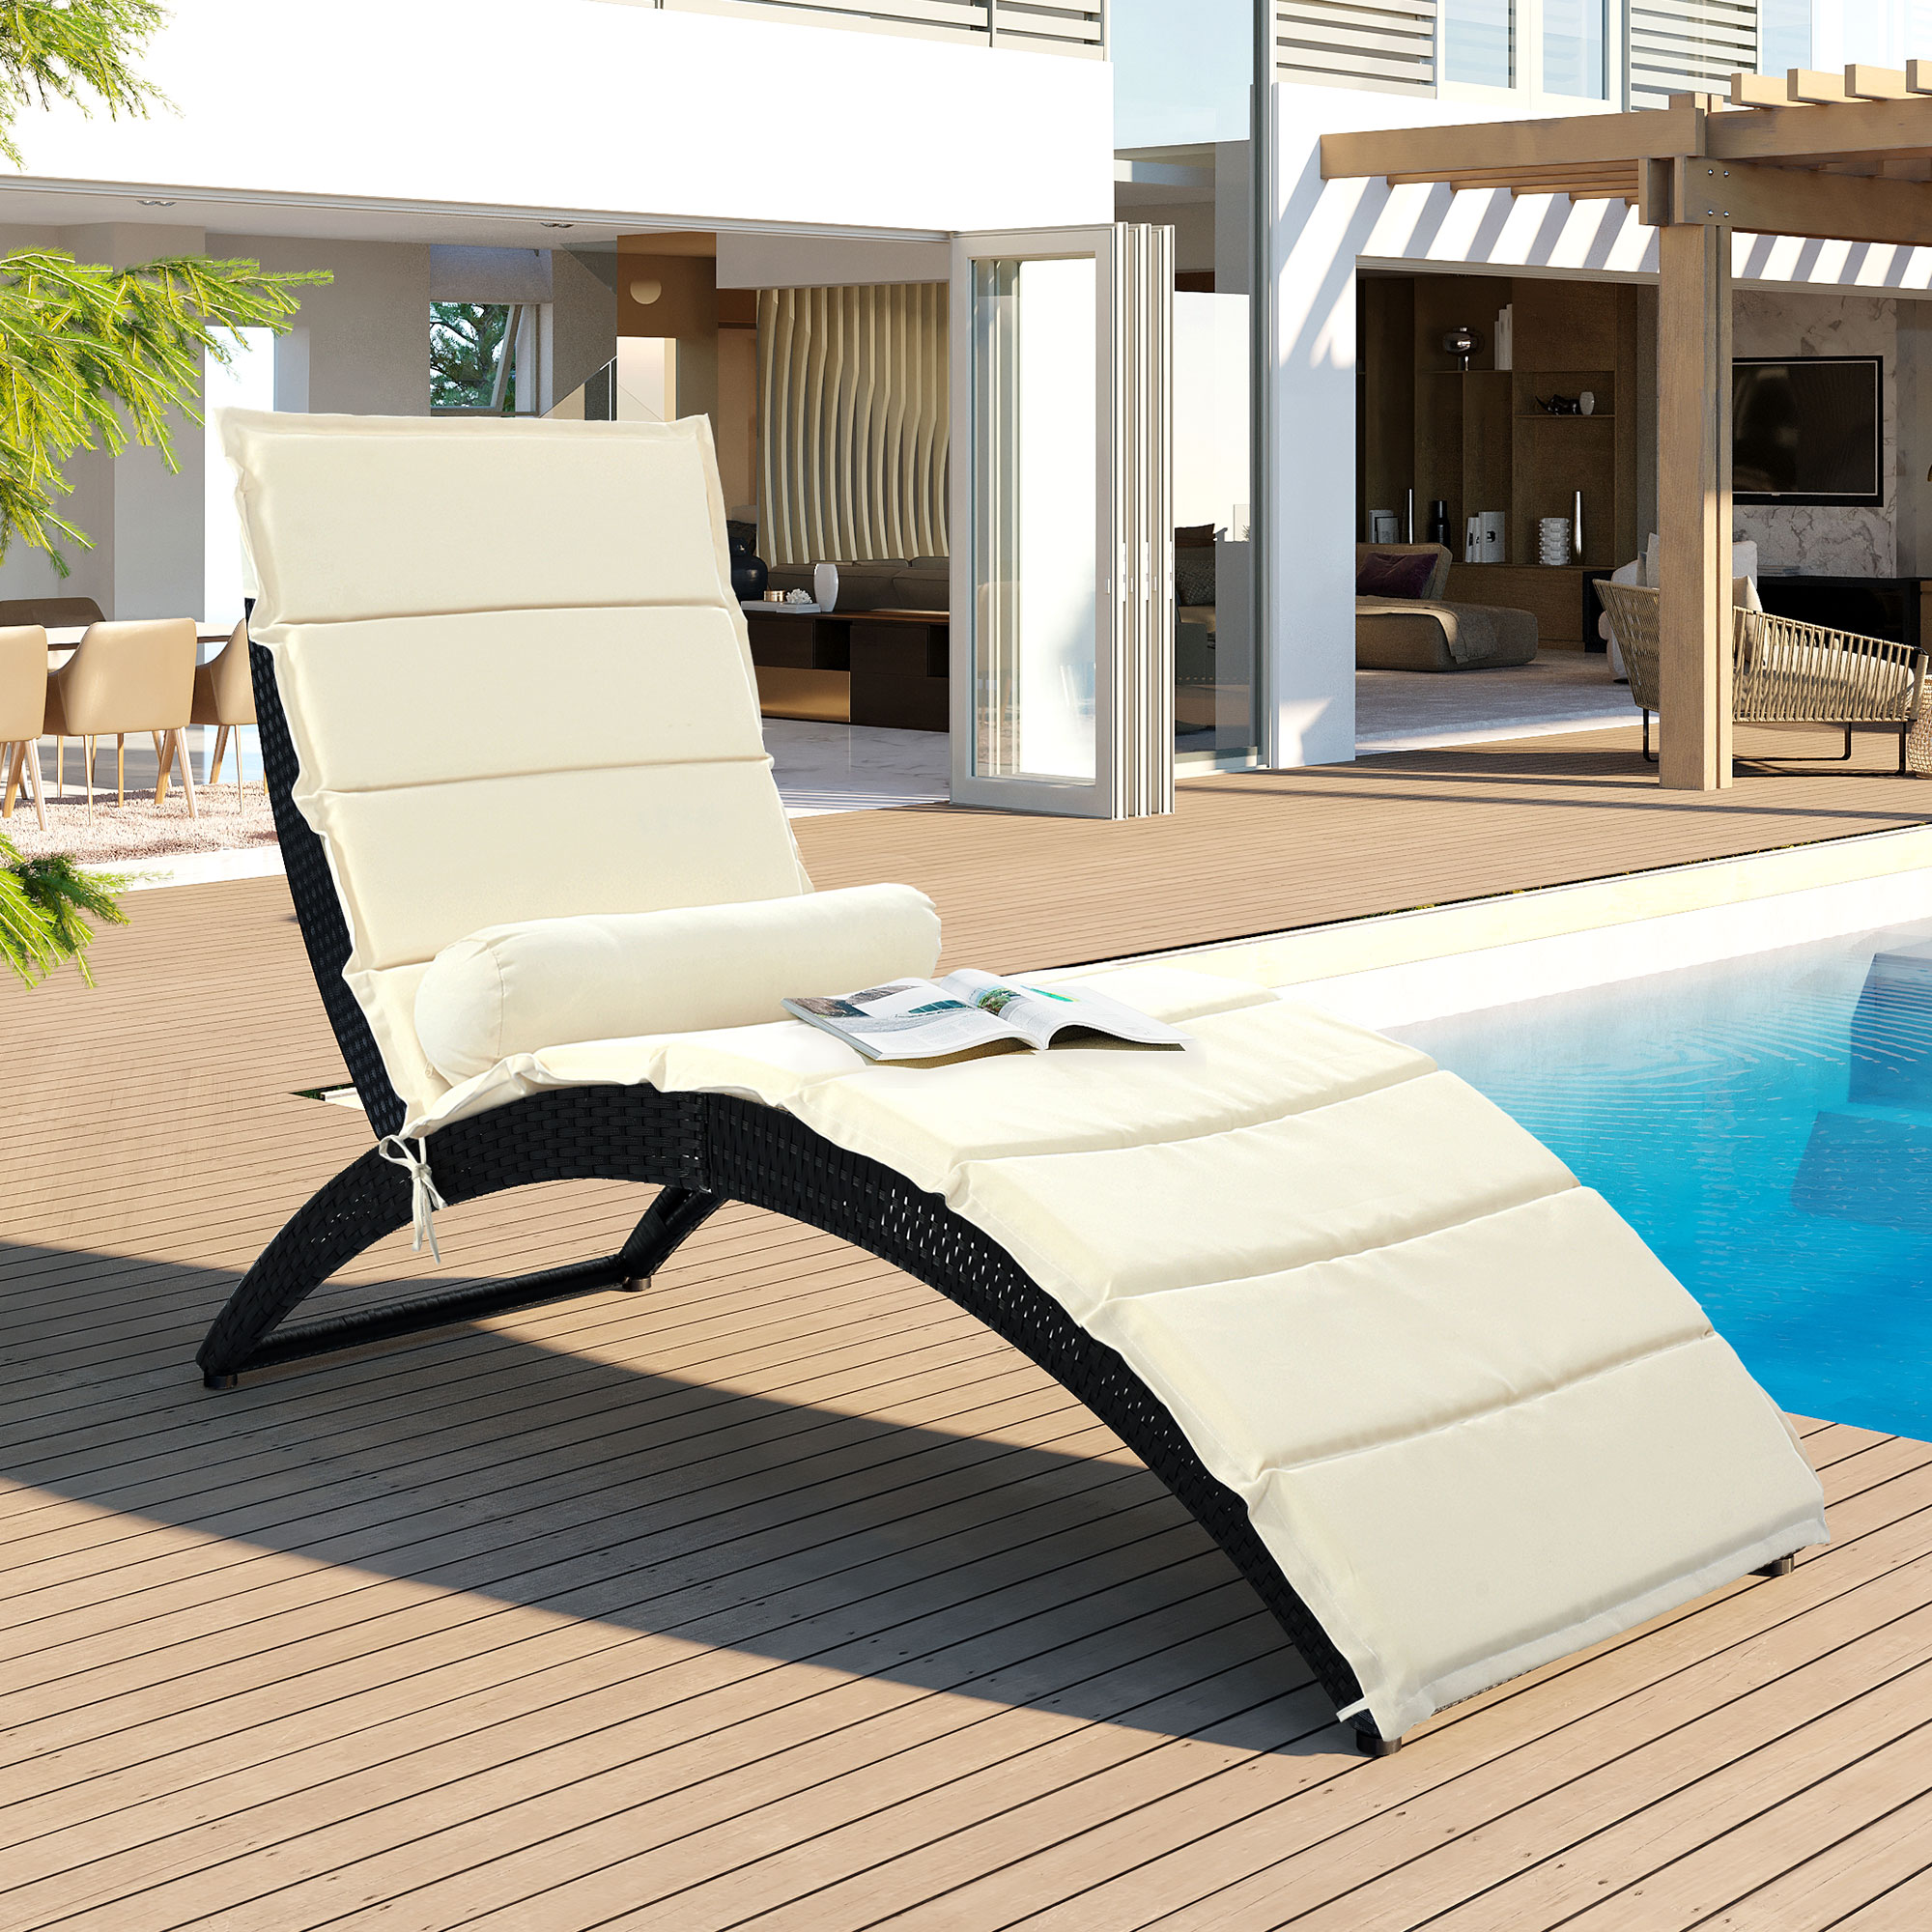 Sesslife Chaise Lounge Chairs for Outside, Patio Adjustable Lounge Chairs with Table Outdoor Rattan Wicker Pool Chaise Lounge Chairs Cushioned Poolside Folding Chaise Lounge Set - image 2 of 10